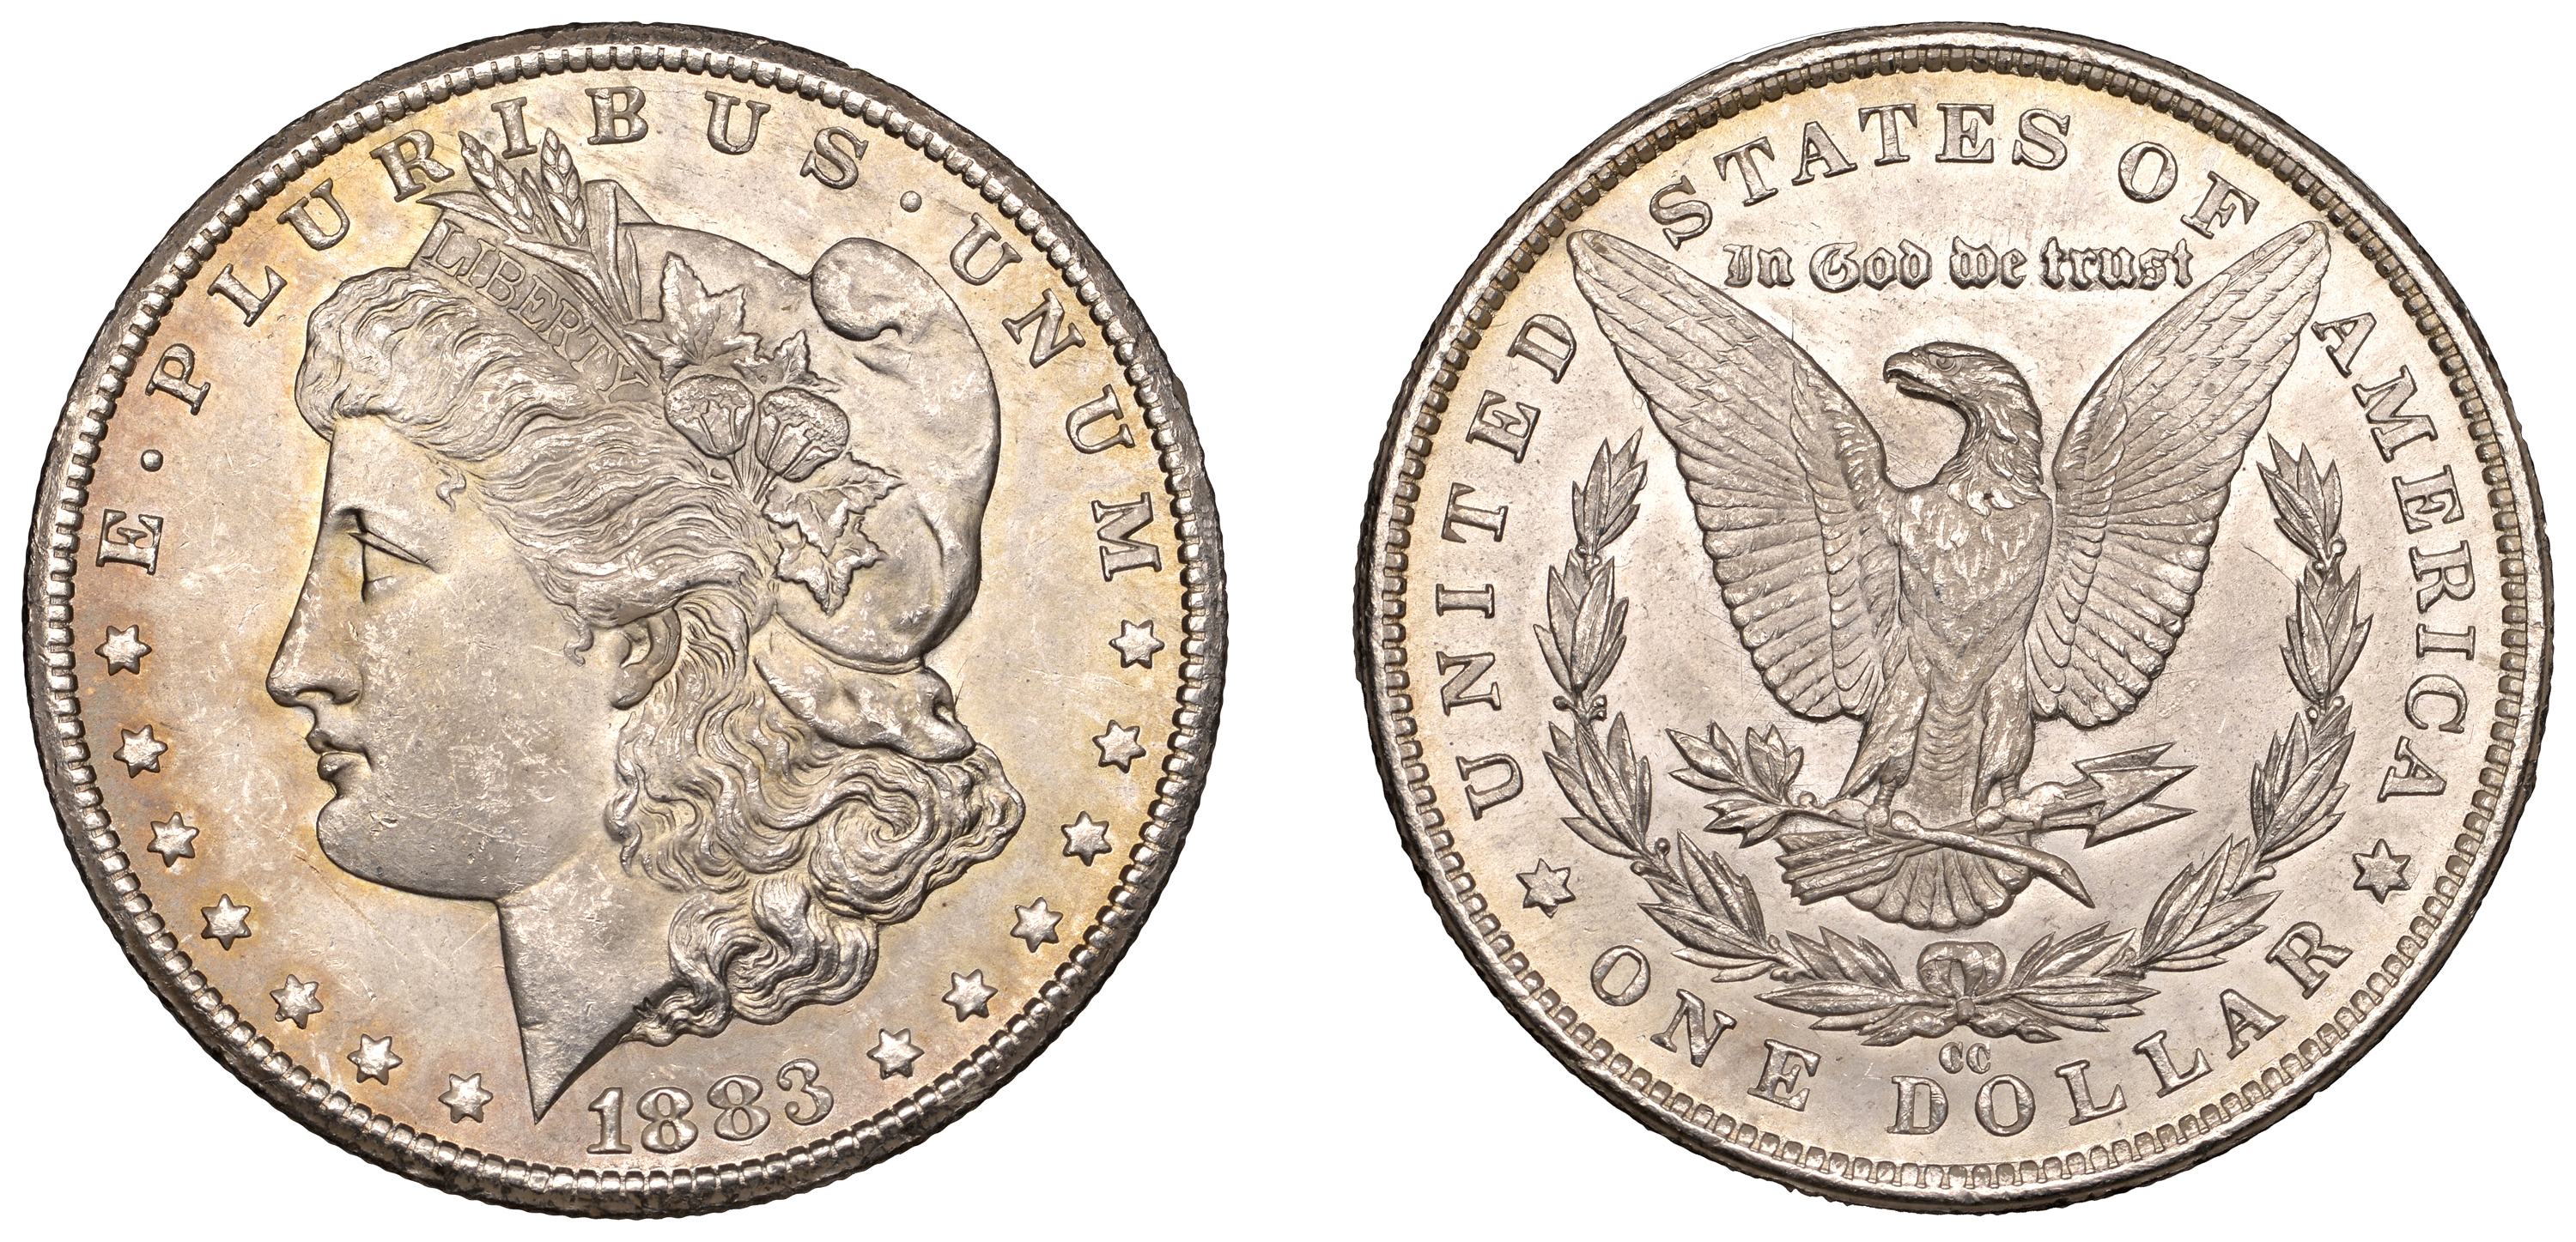 United States of America, Dollar, 1883cc. Some light bagmarking, about as struck Â£120-Â£150